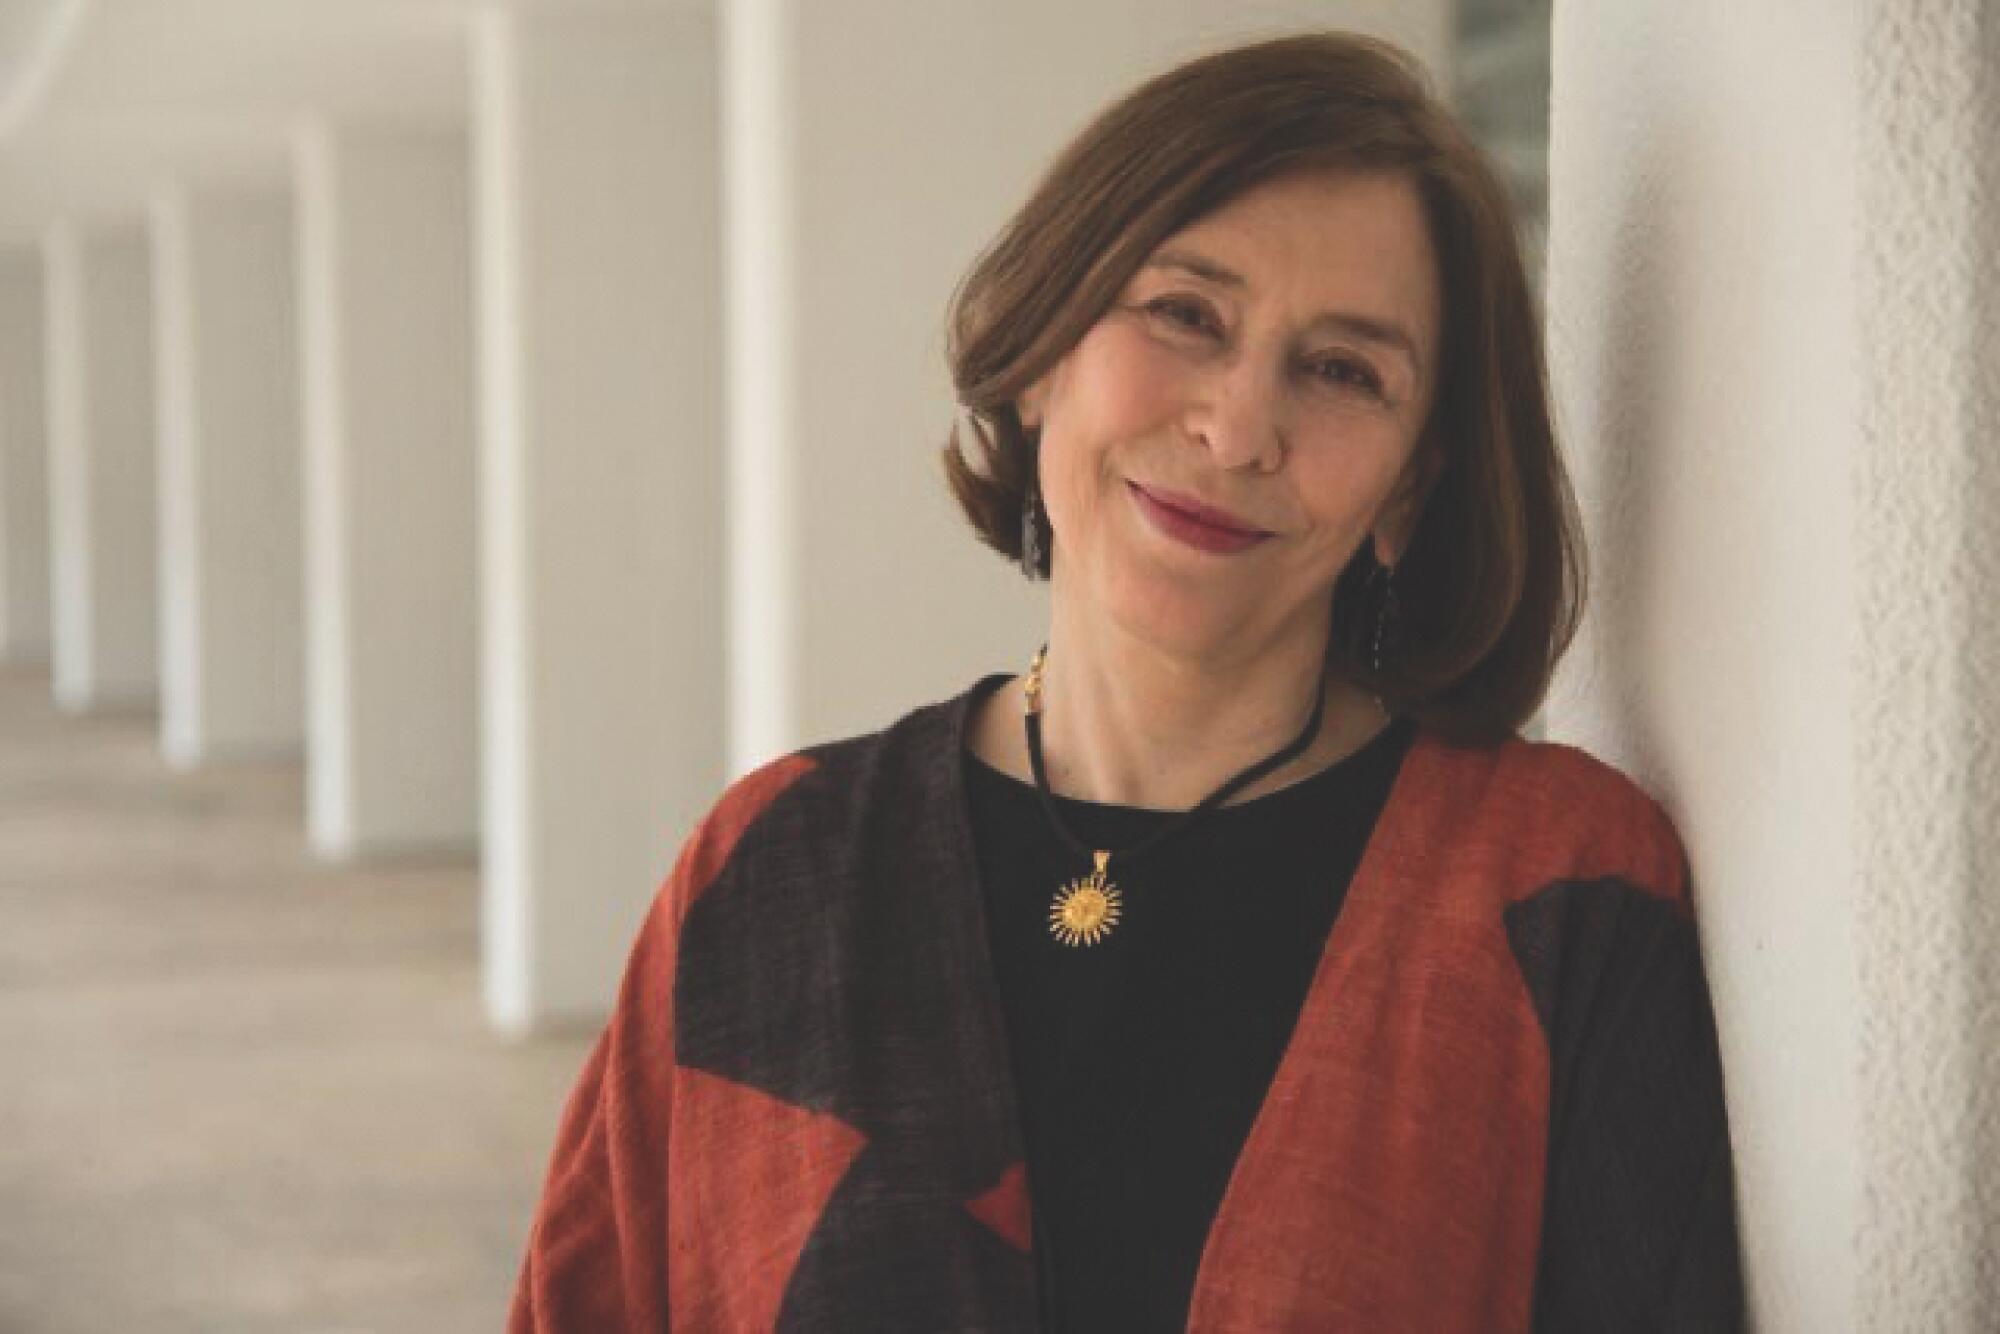 A portrait of Azar Nafisi against a backdrop of white pillars.